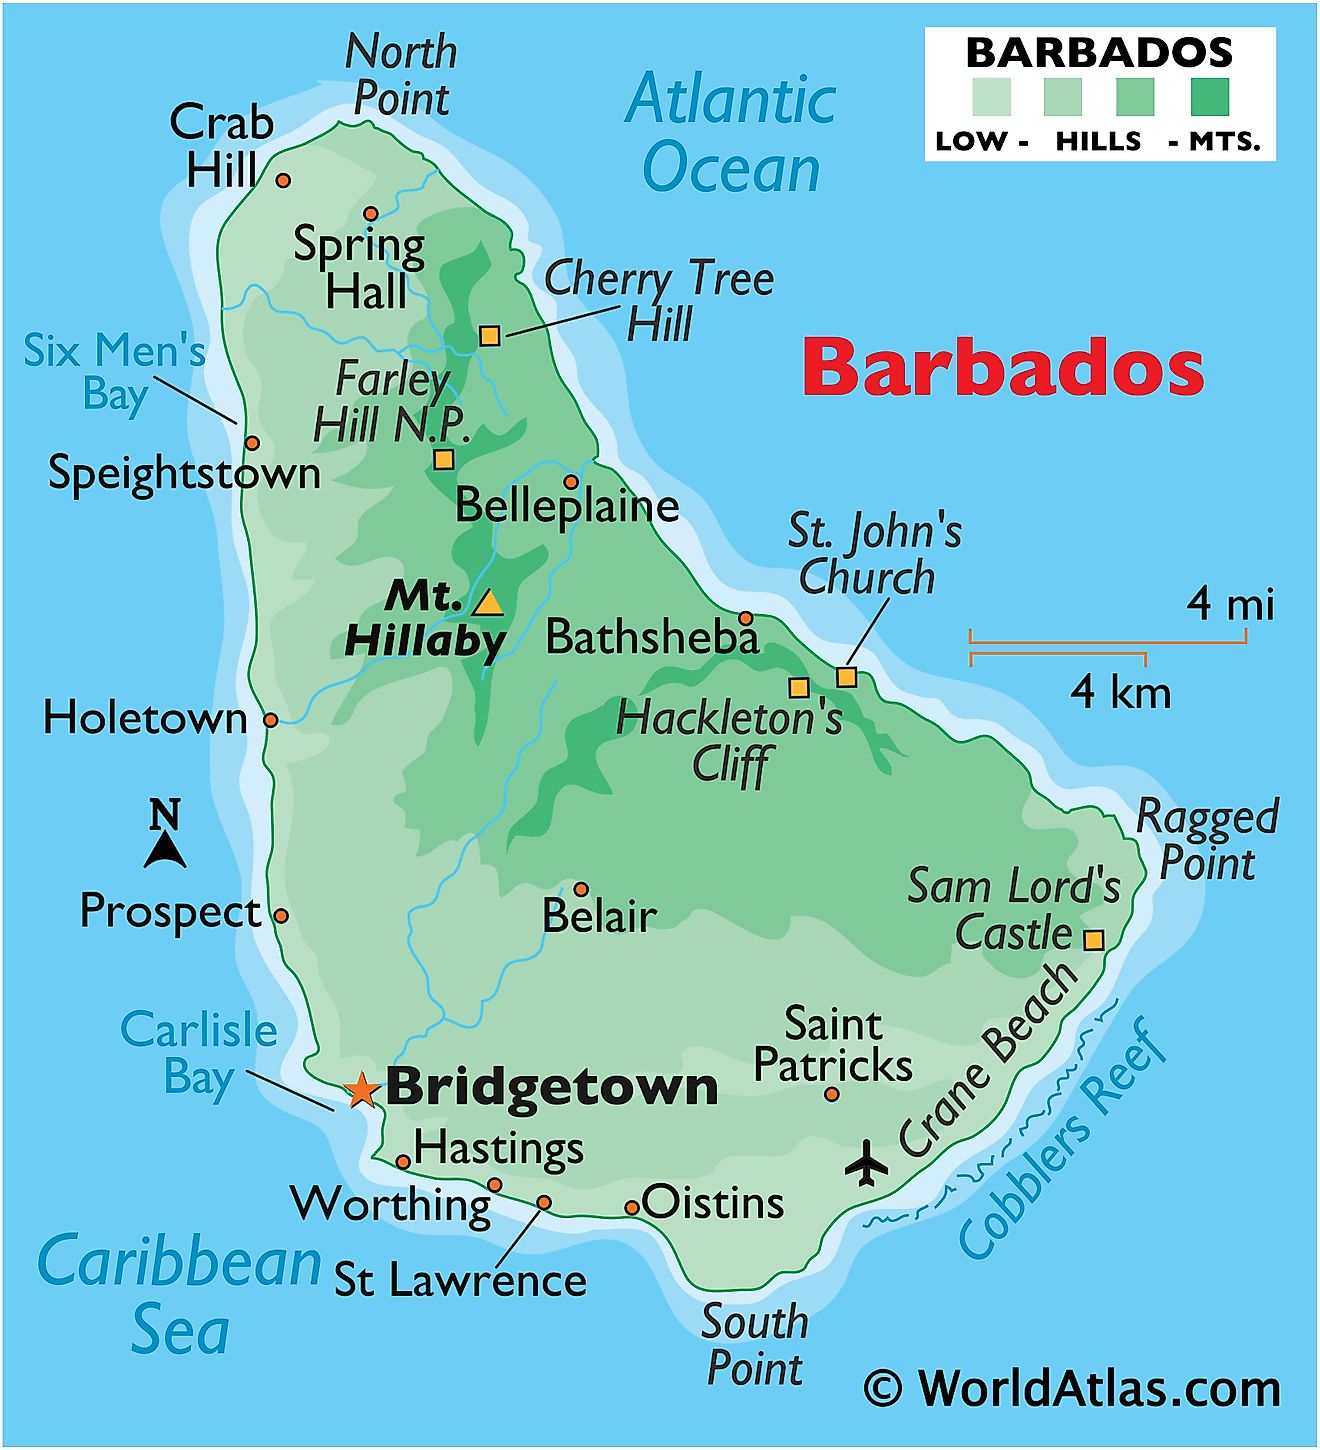 Physical Map of Barbados showing relief, highest point, important settlements, extreme points, and surrounding water features.